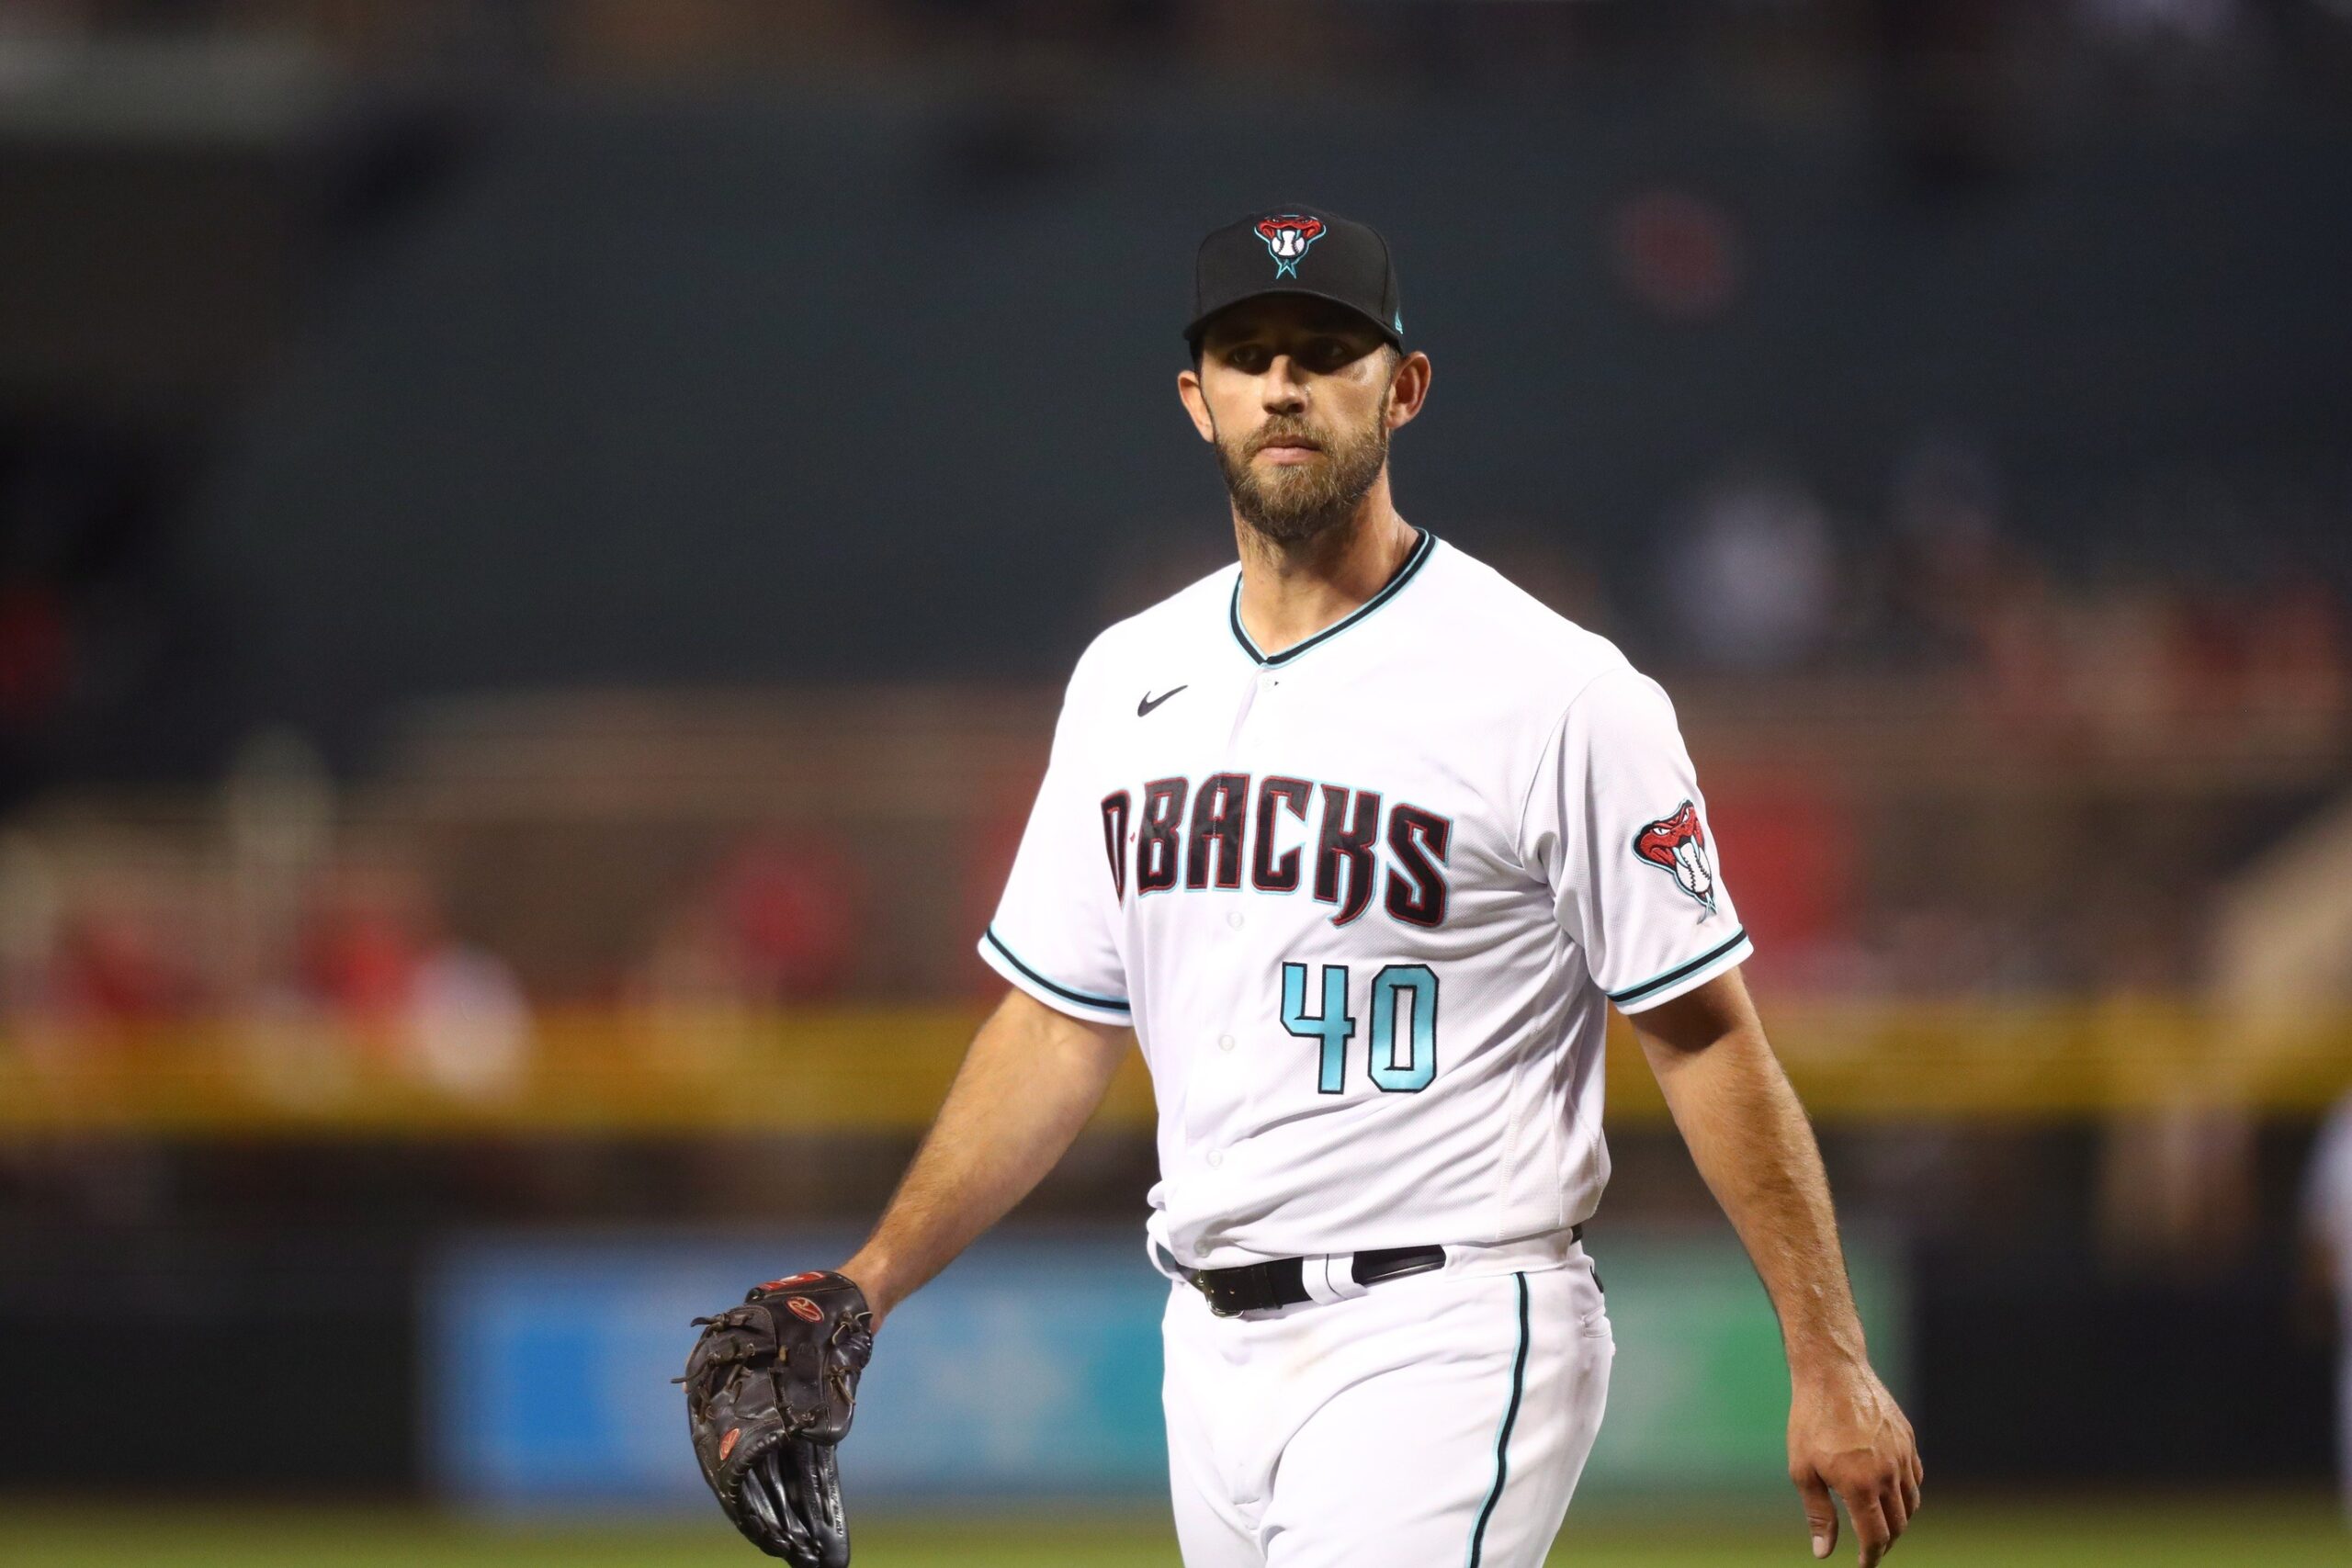 Diamondbacks general manager Mike Hazen signed Madison Bumgarner to a five-year contract in 2019.